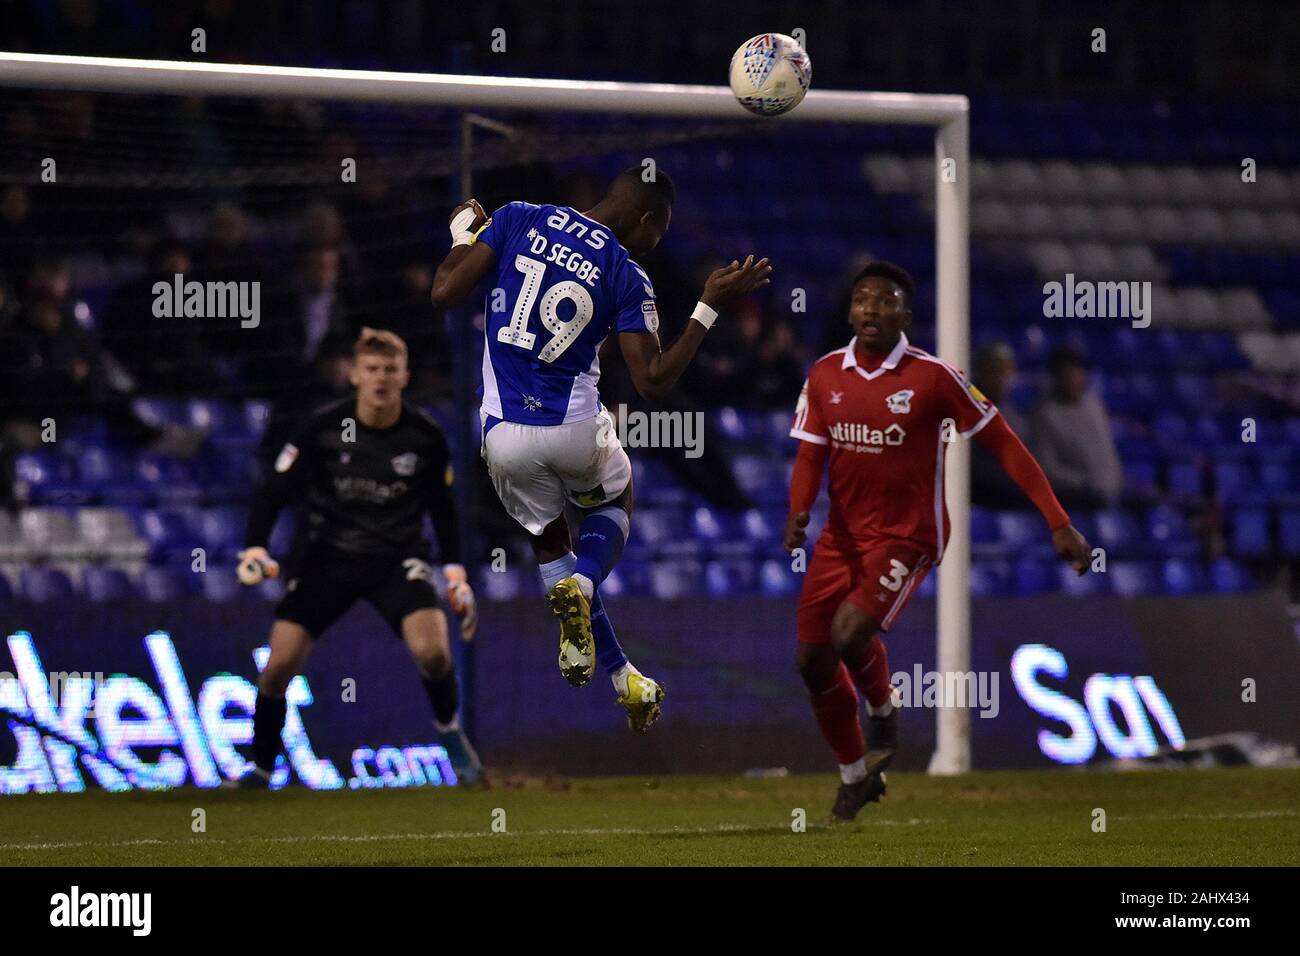 Oldham, UK. 01st Jan, 2020. OLDHAM, ENGLAND - JANUARY 1ST Desire Segbe Azankpo of Oldham Athletic and Kgosi Ntlhe during the Sky Bet League 2 match between Oldham Athletic and Scunthorpe United at Boundary Park, Oldham on Wednesday 1st January 2020. (Credit: Eddie Garvey | MI News) Photograph may only be used for newspaper and/or magazine editorial purposes, license required for commercial use Credit: MI News & Sport /Alamy Live News Stock Photo